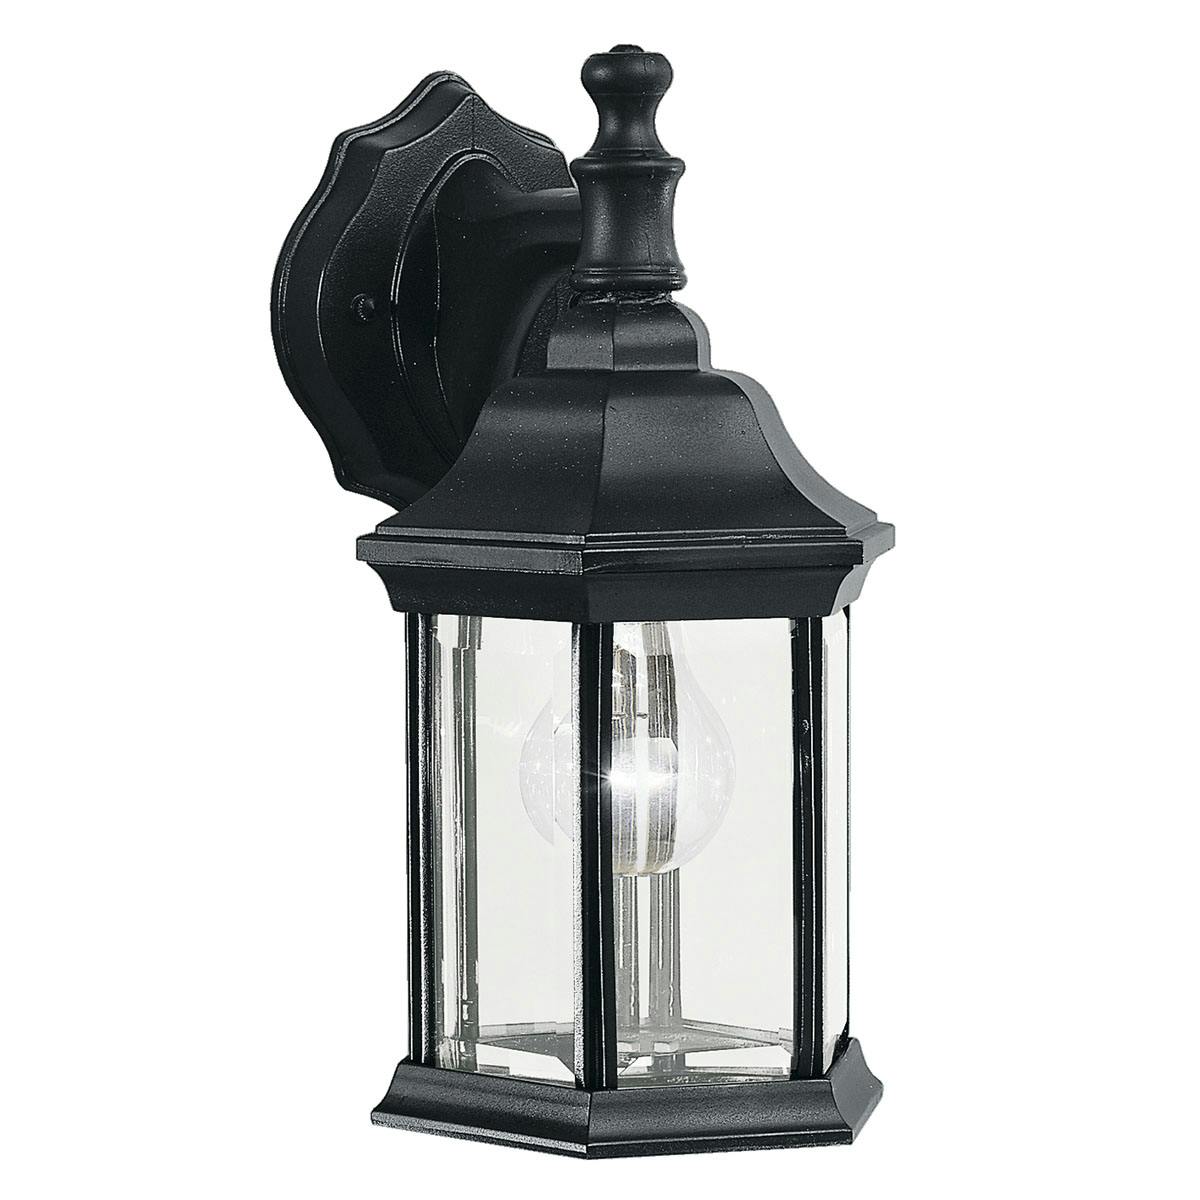 Chesapeake 11.75" Wall Light in Black on a white background